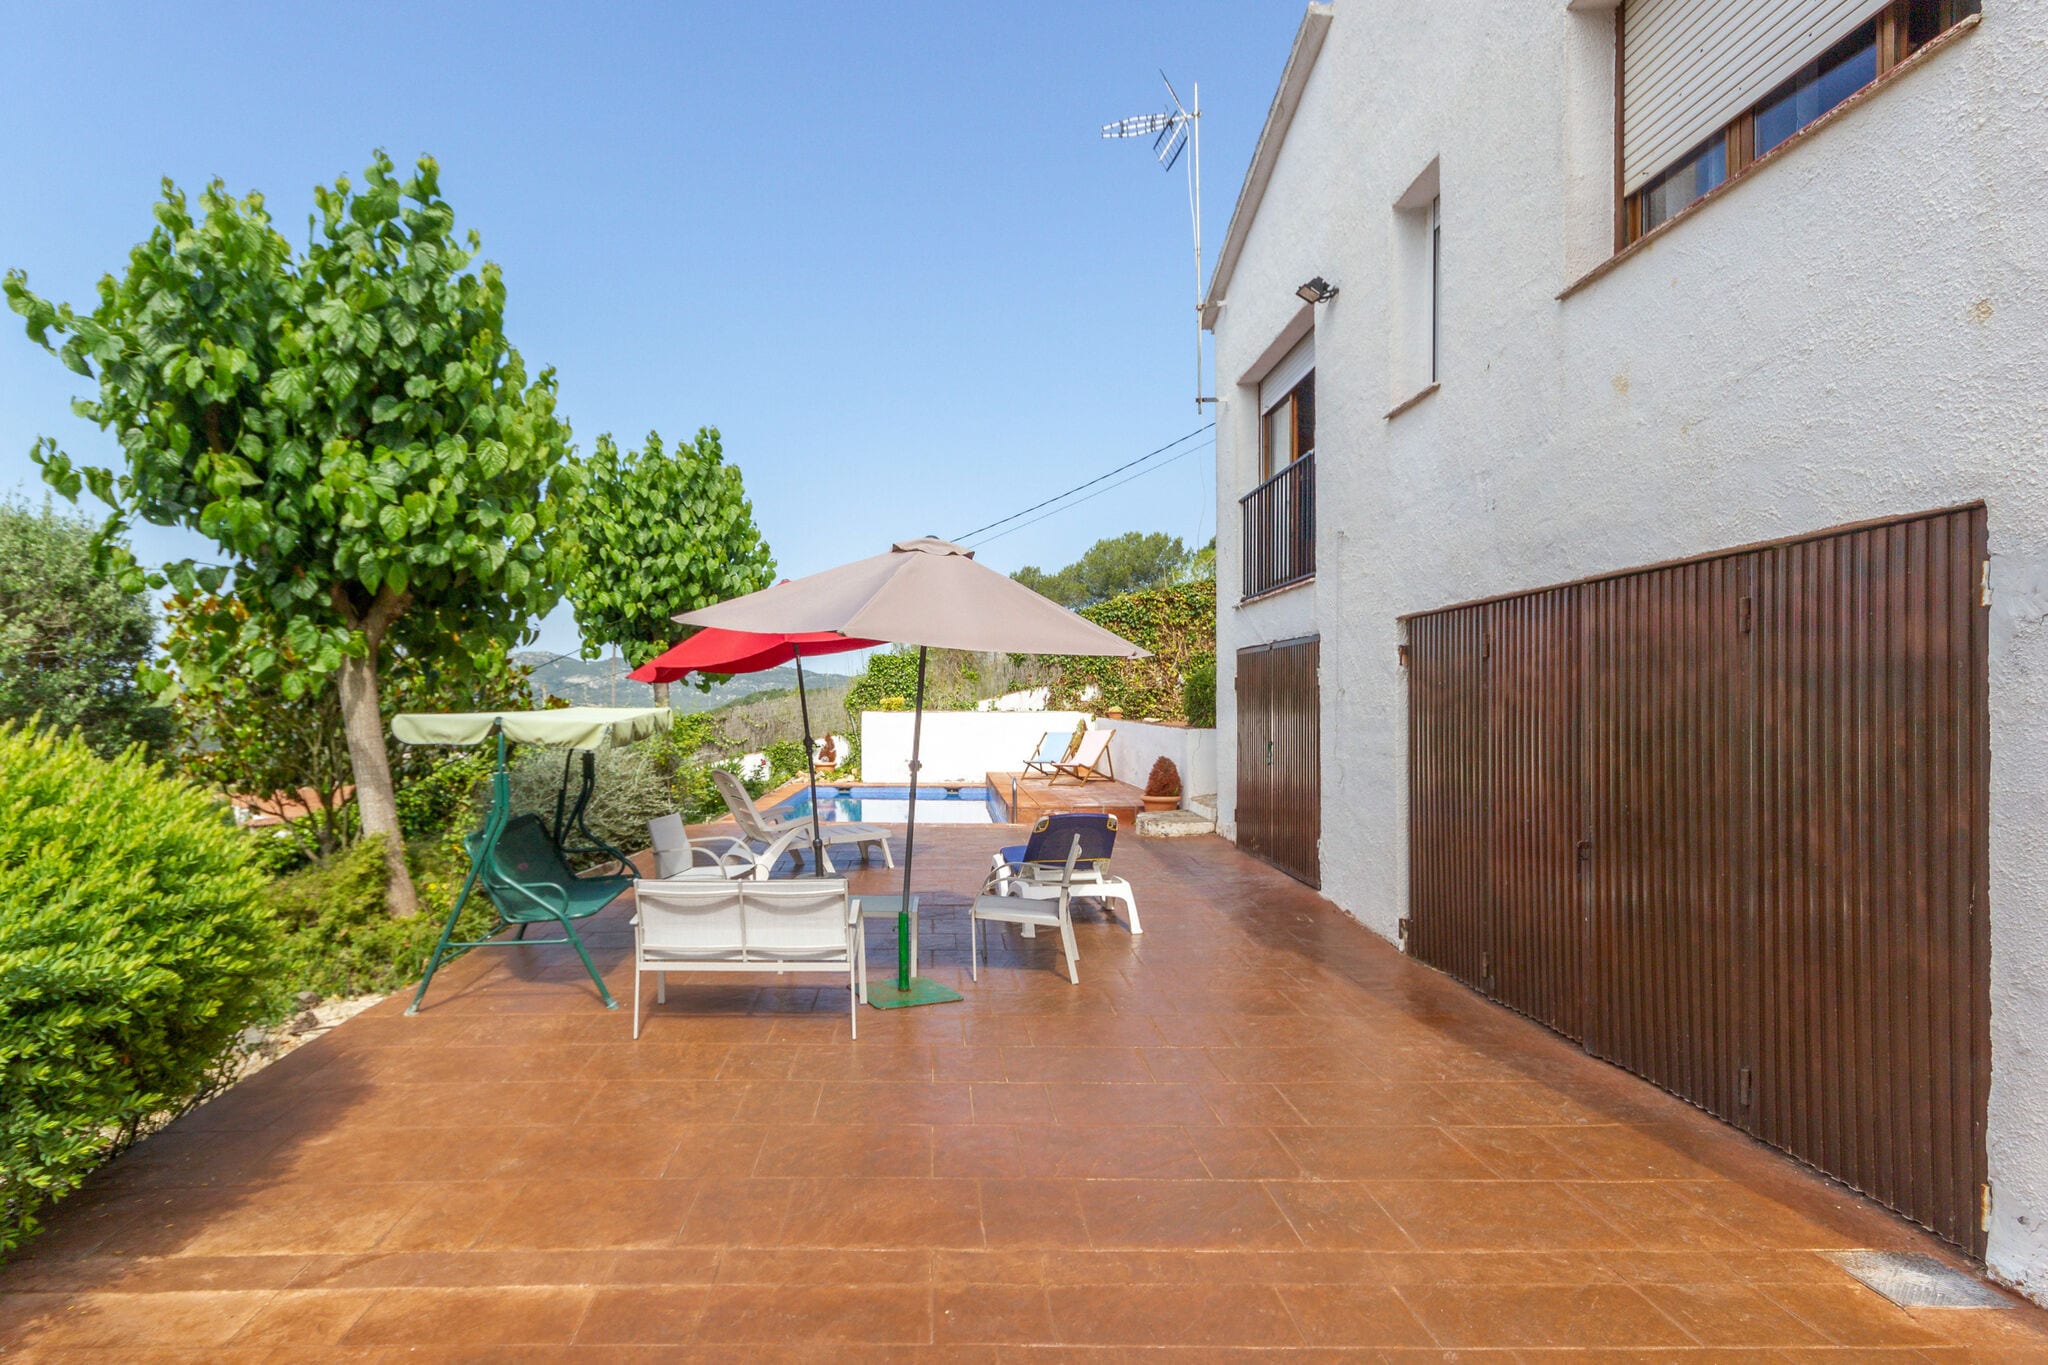 Welcoming Villa in Olivella with Swimming Pool